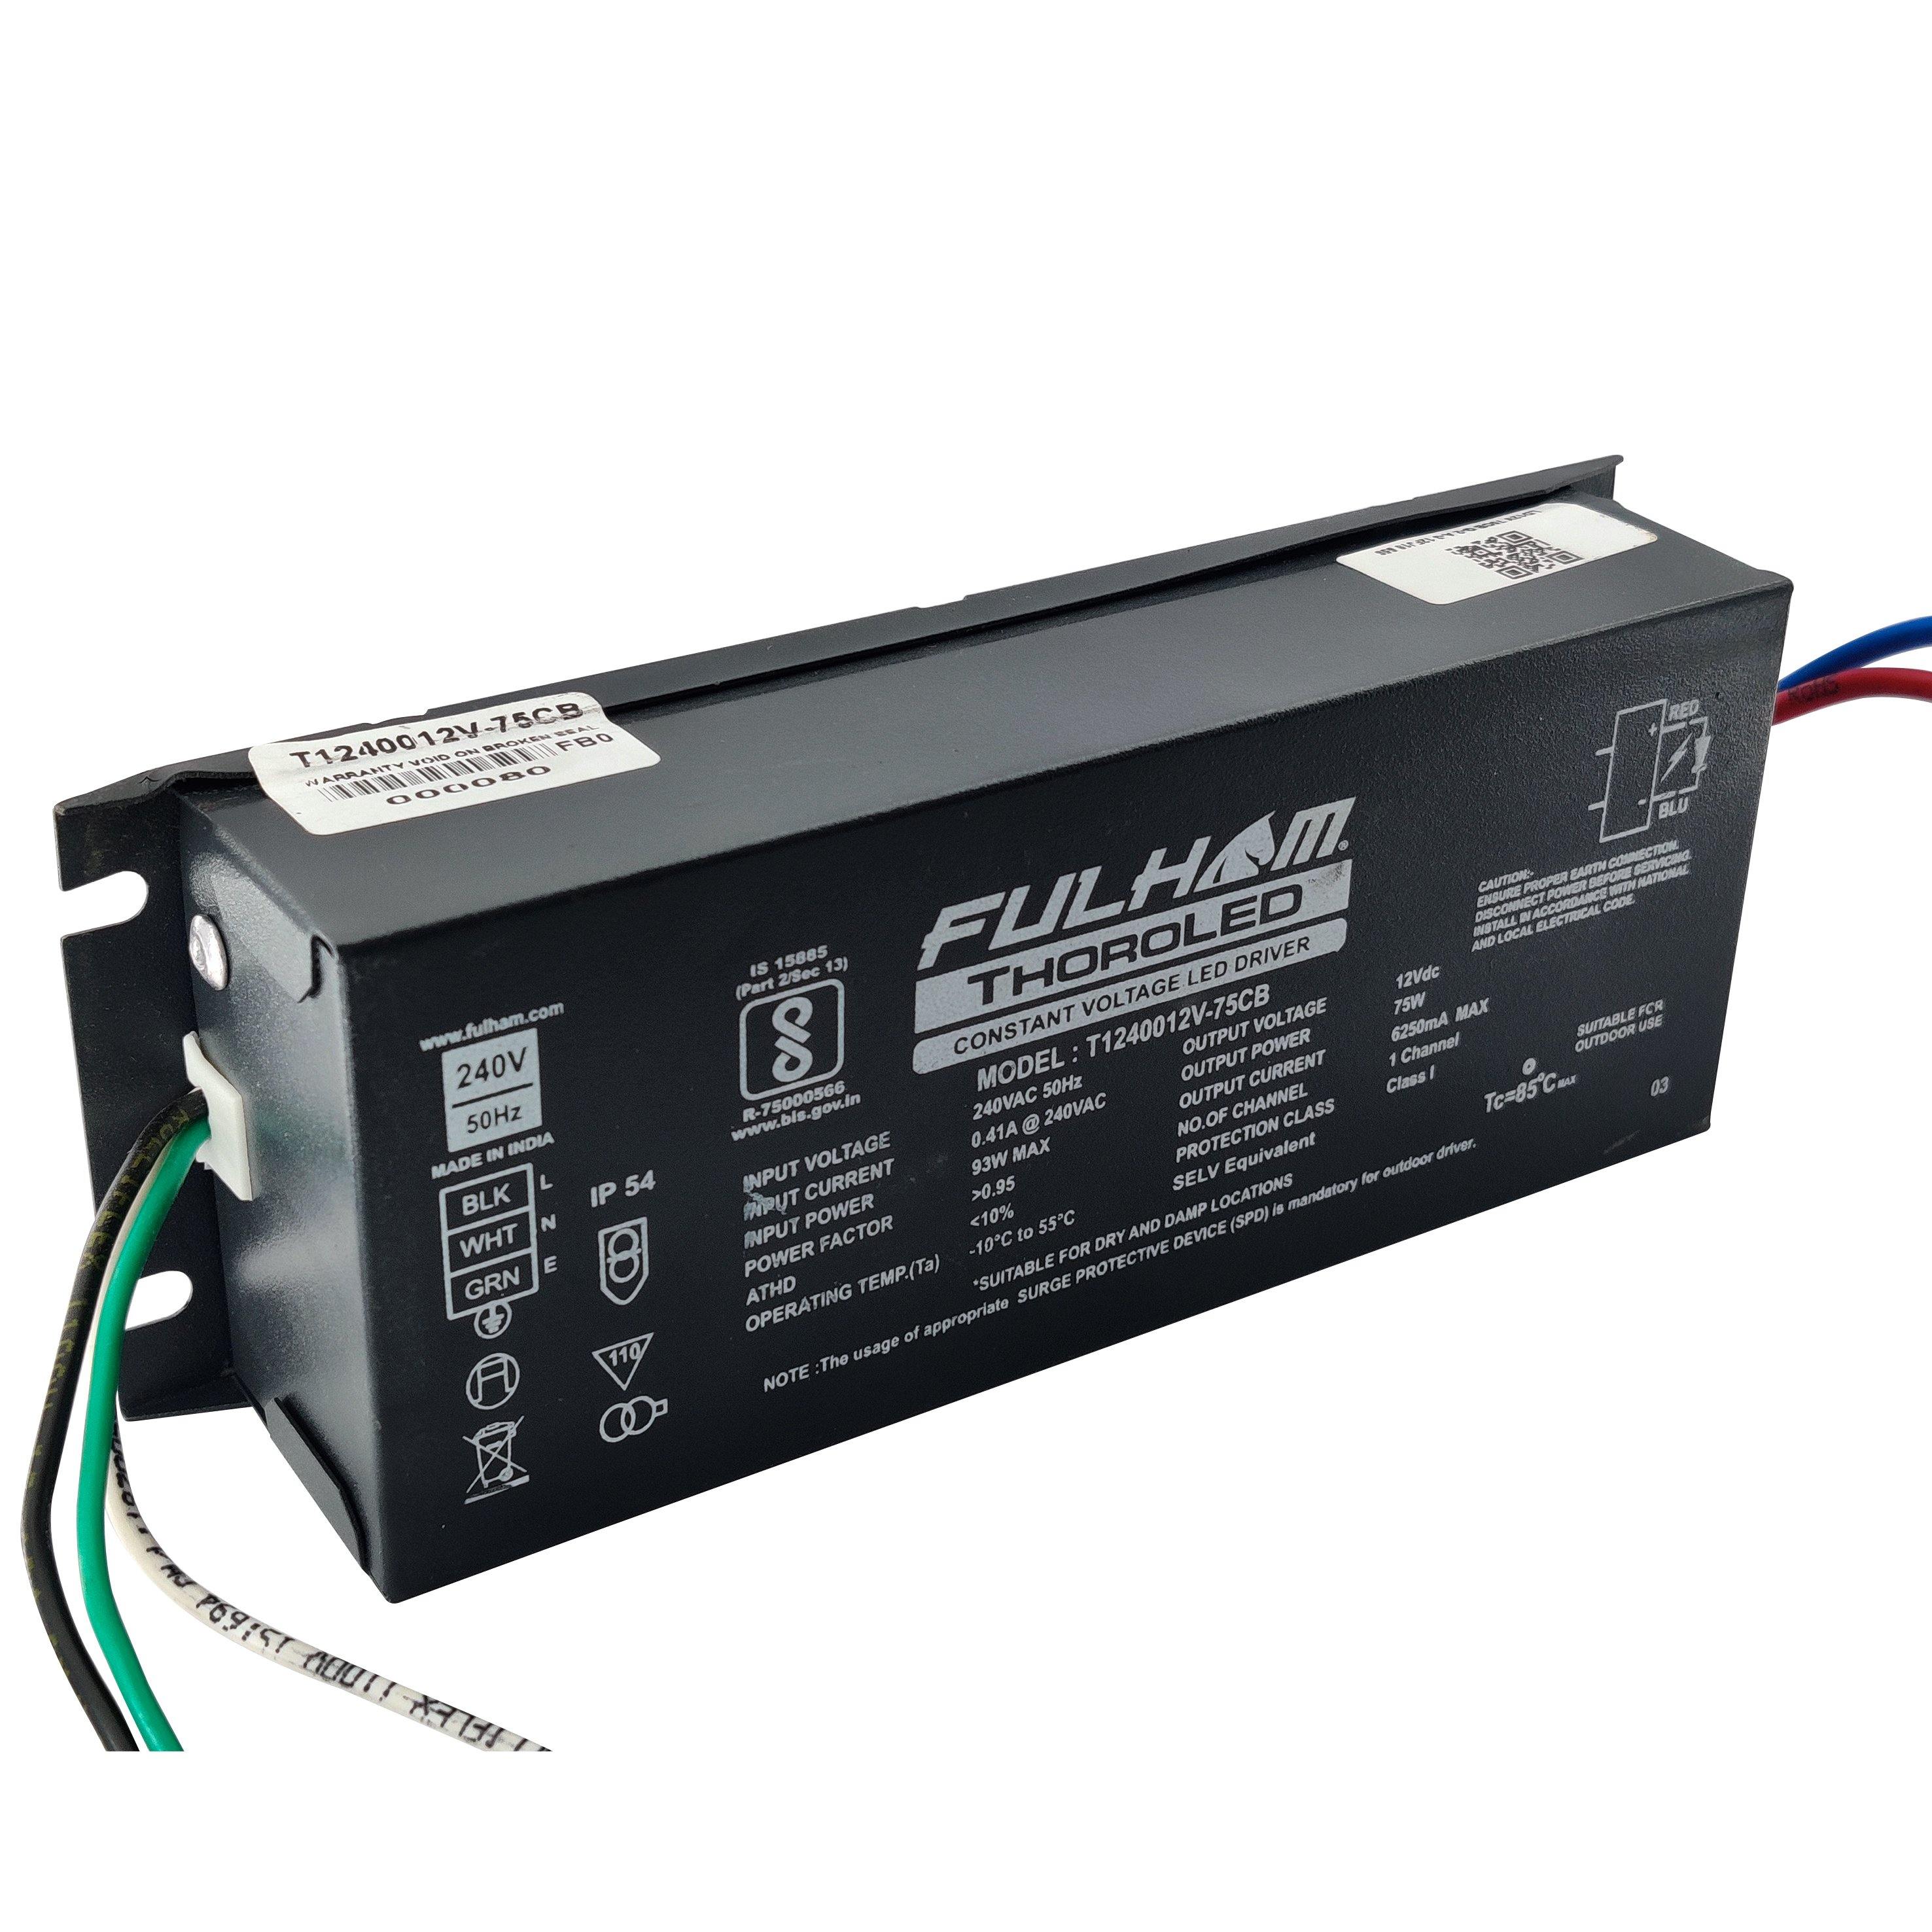 FULHAM 75W LED STRIP CONSTANT VOLTAGE LED DRIVER OUTDOOR RATED - Ankur Lighting